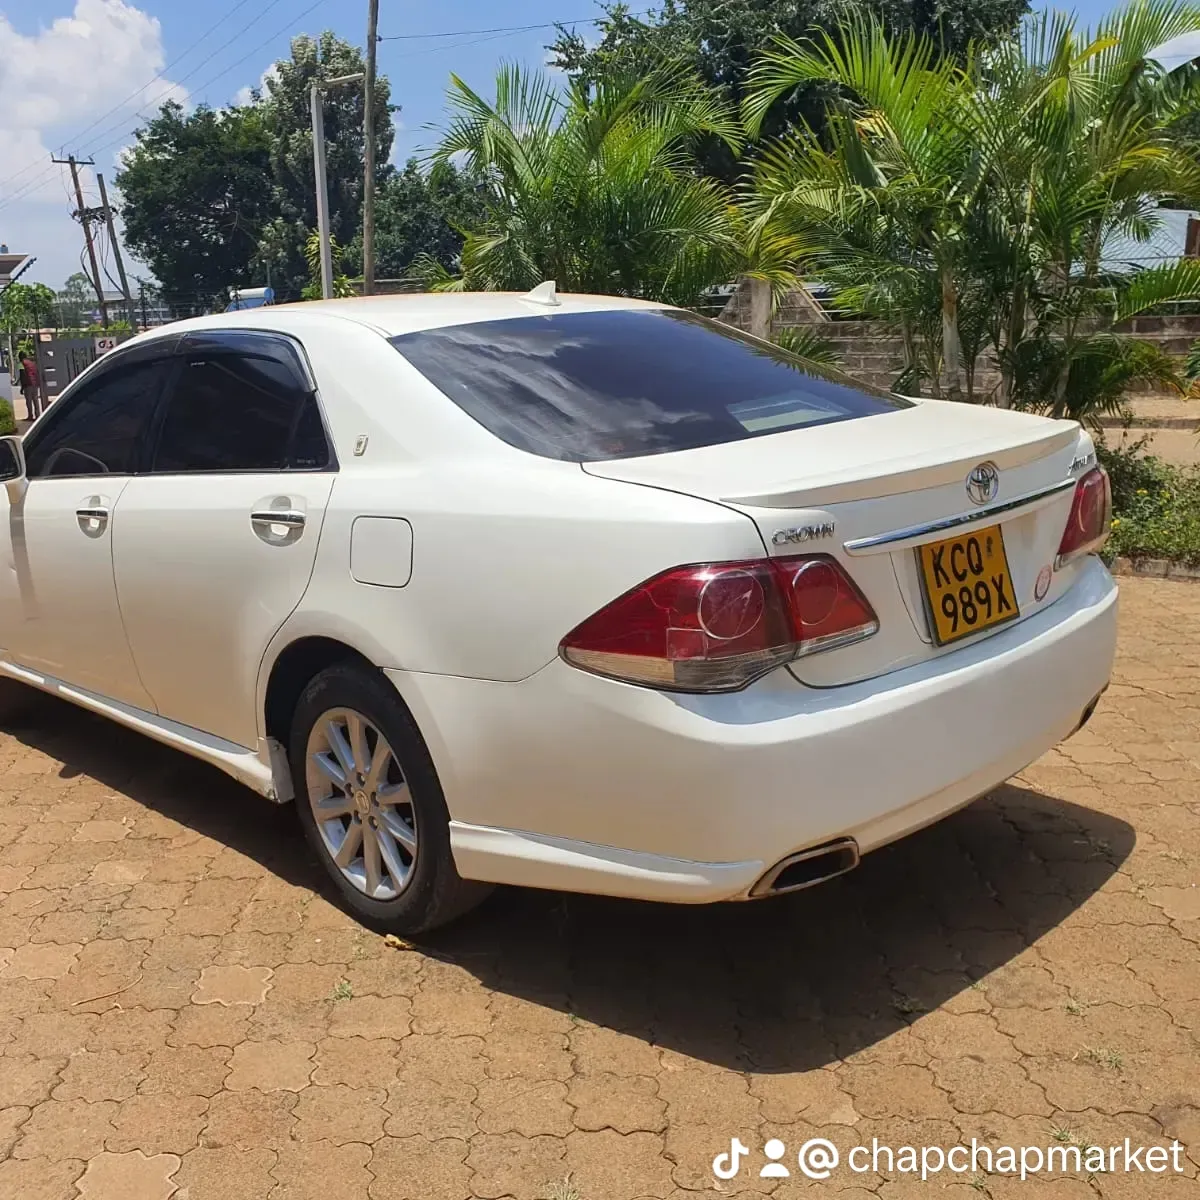 Toyota CROWN ATHLETE for Sale in kenya You pay Deposit Trade in Ok Hot Deal hire purchase installments